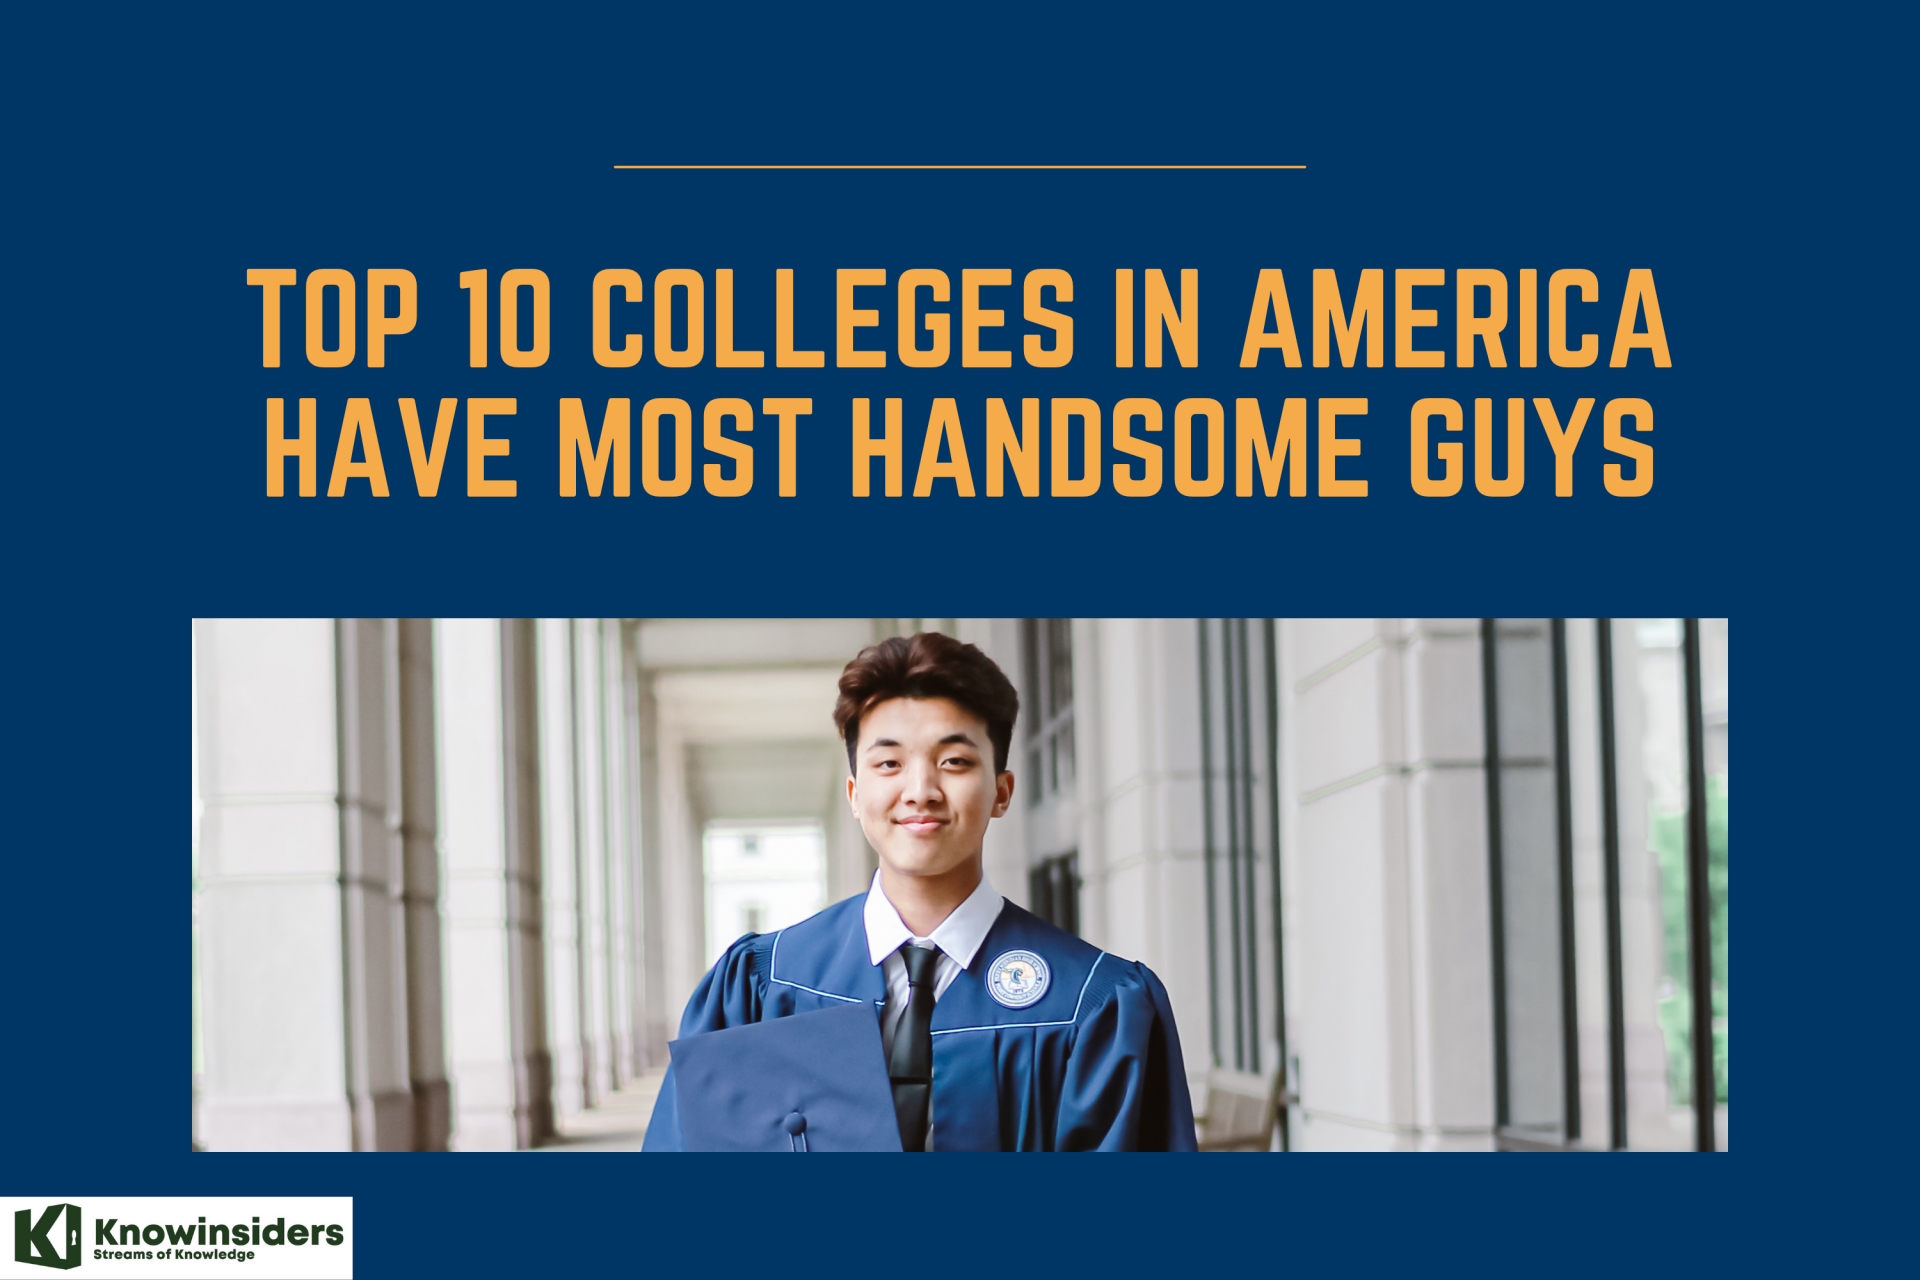 Top 10 Colleges in the USA Have Most Handsome Guys